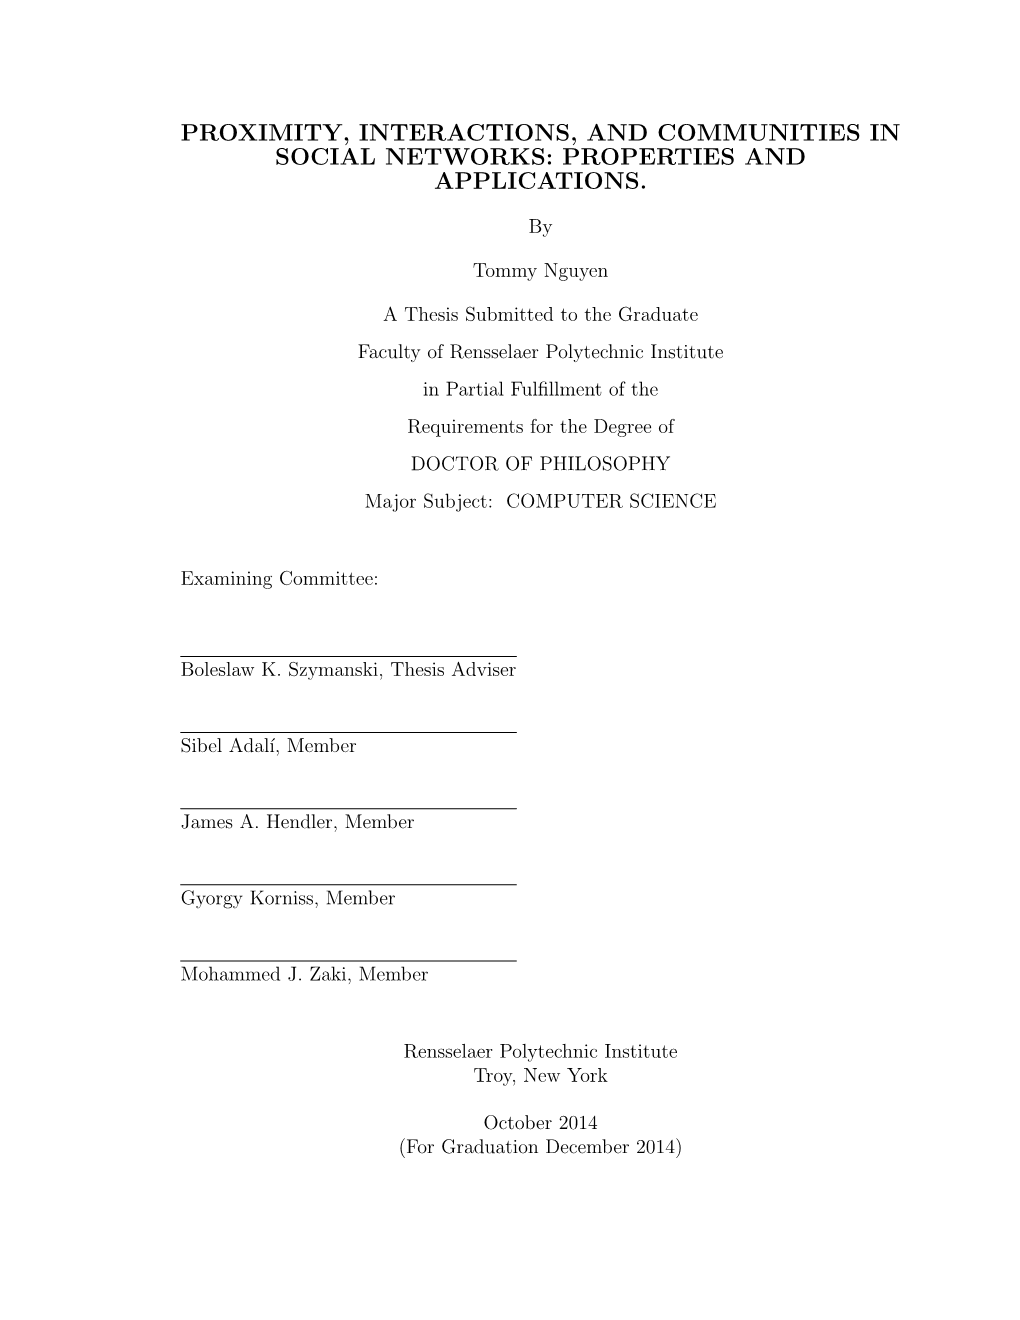 Proximity, Interactions, and Communities in Social Networks: Properties and Applications